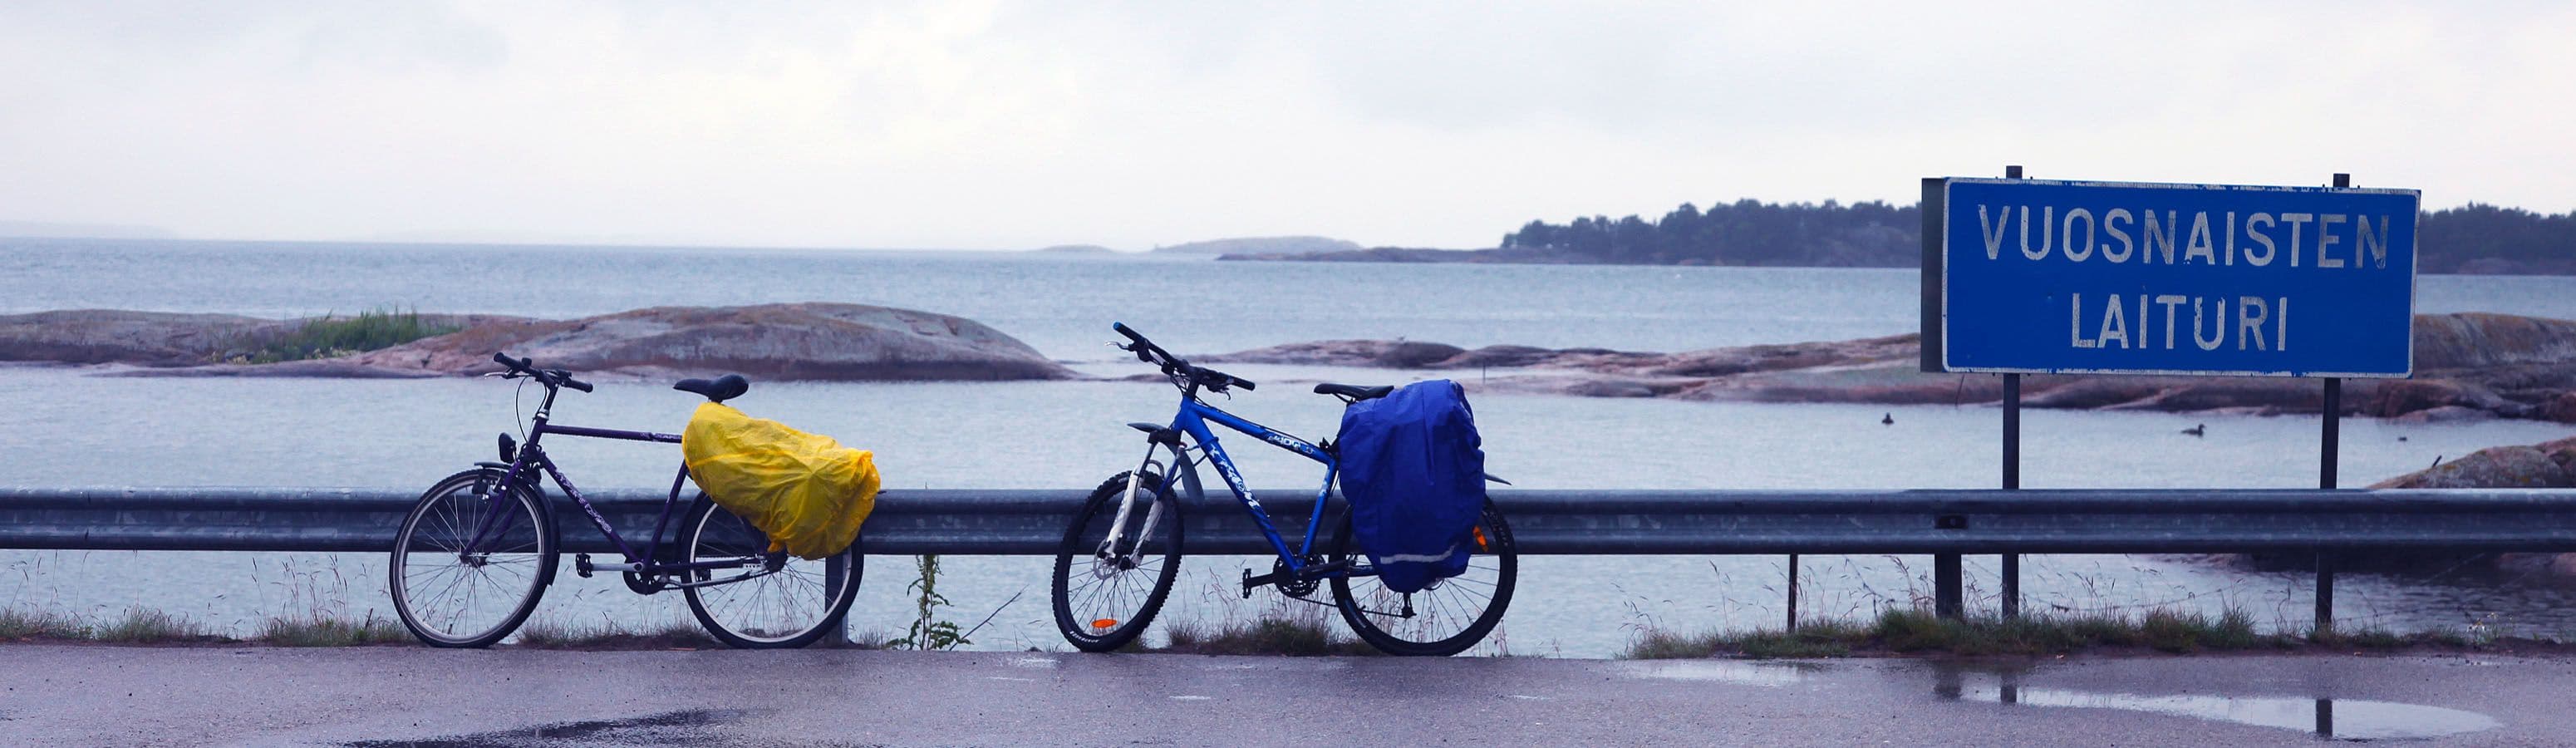 Åland Islands – go for a great cycling holiday